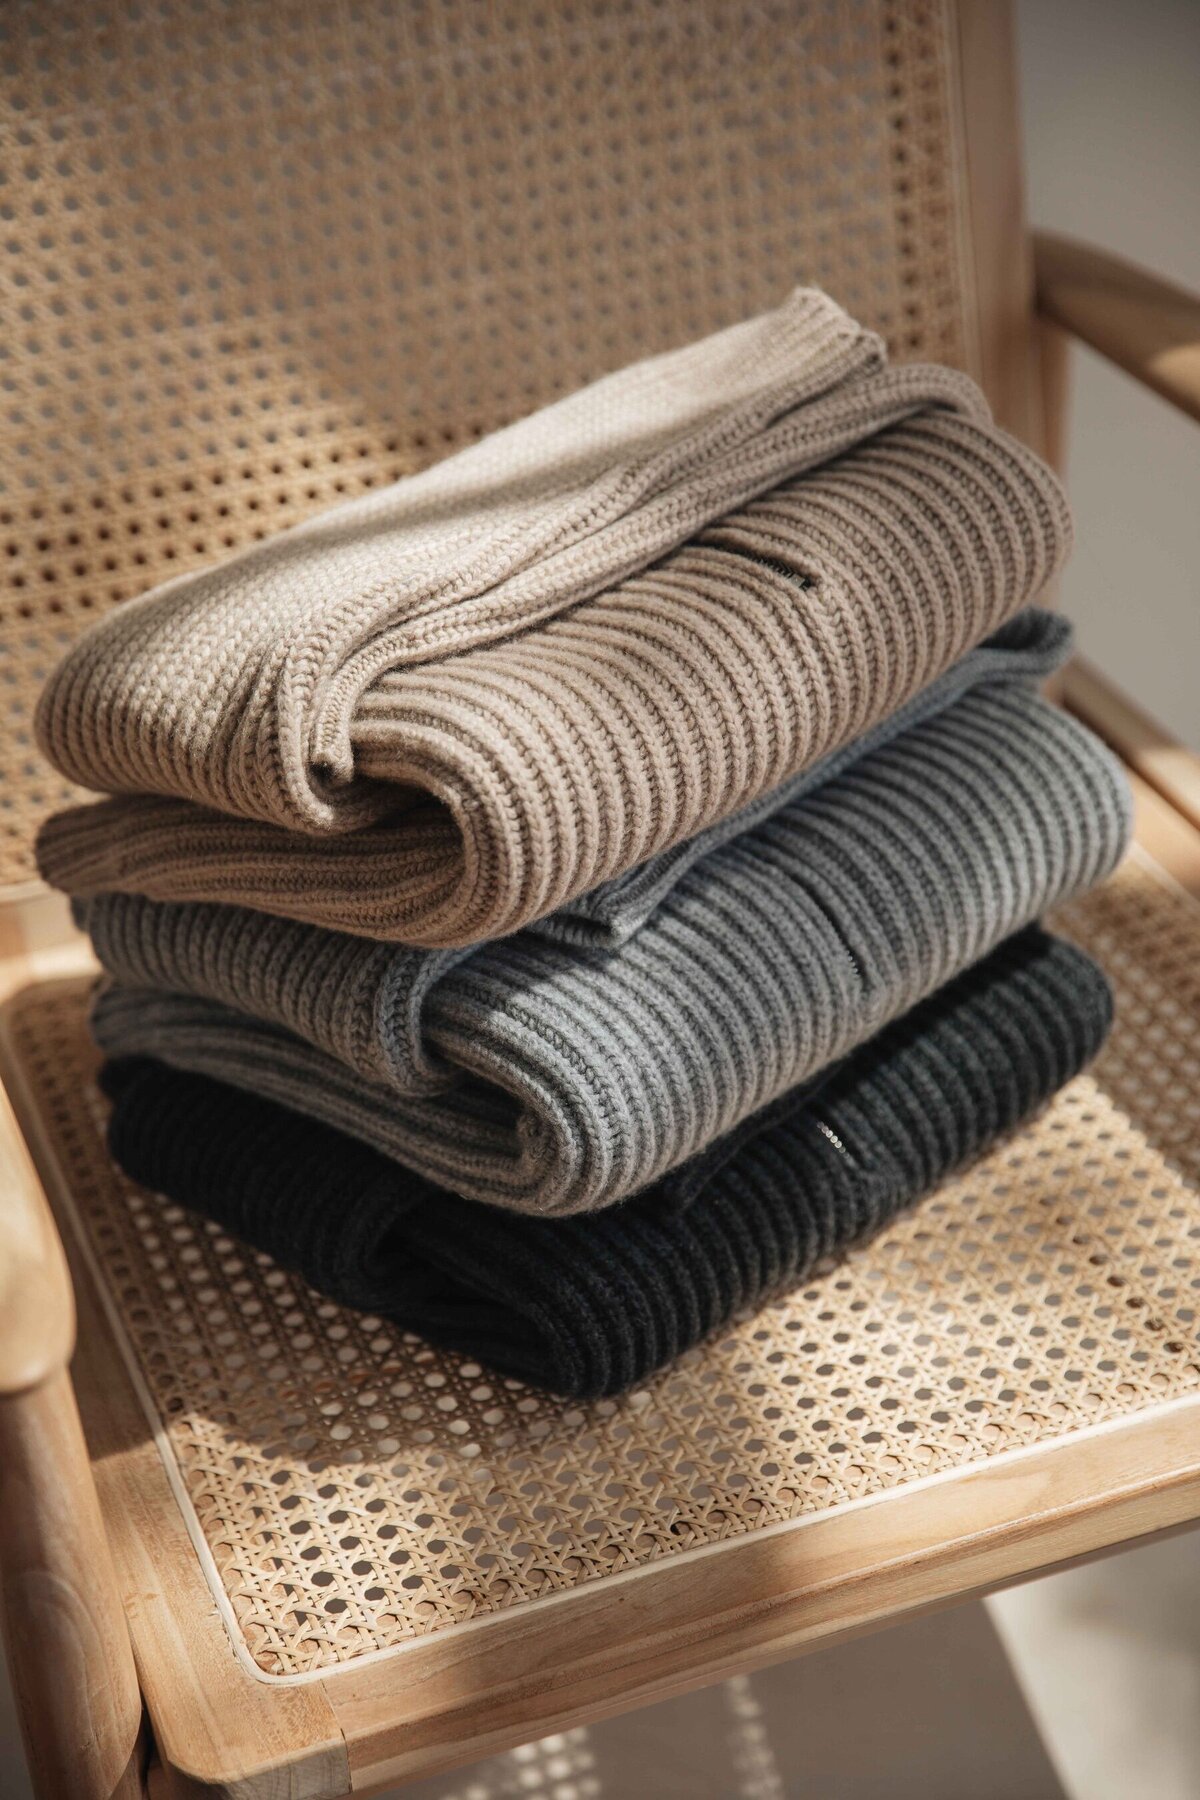 Product picture of cashmere sweaters